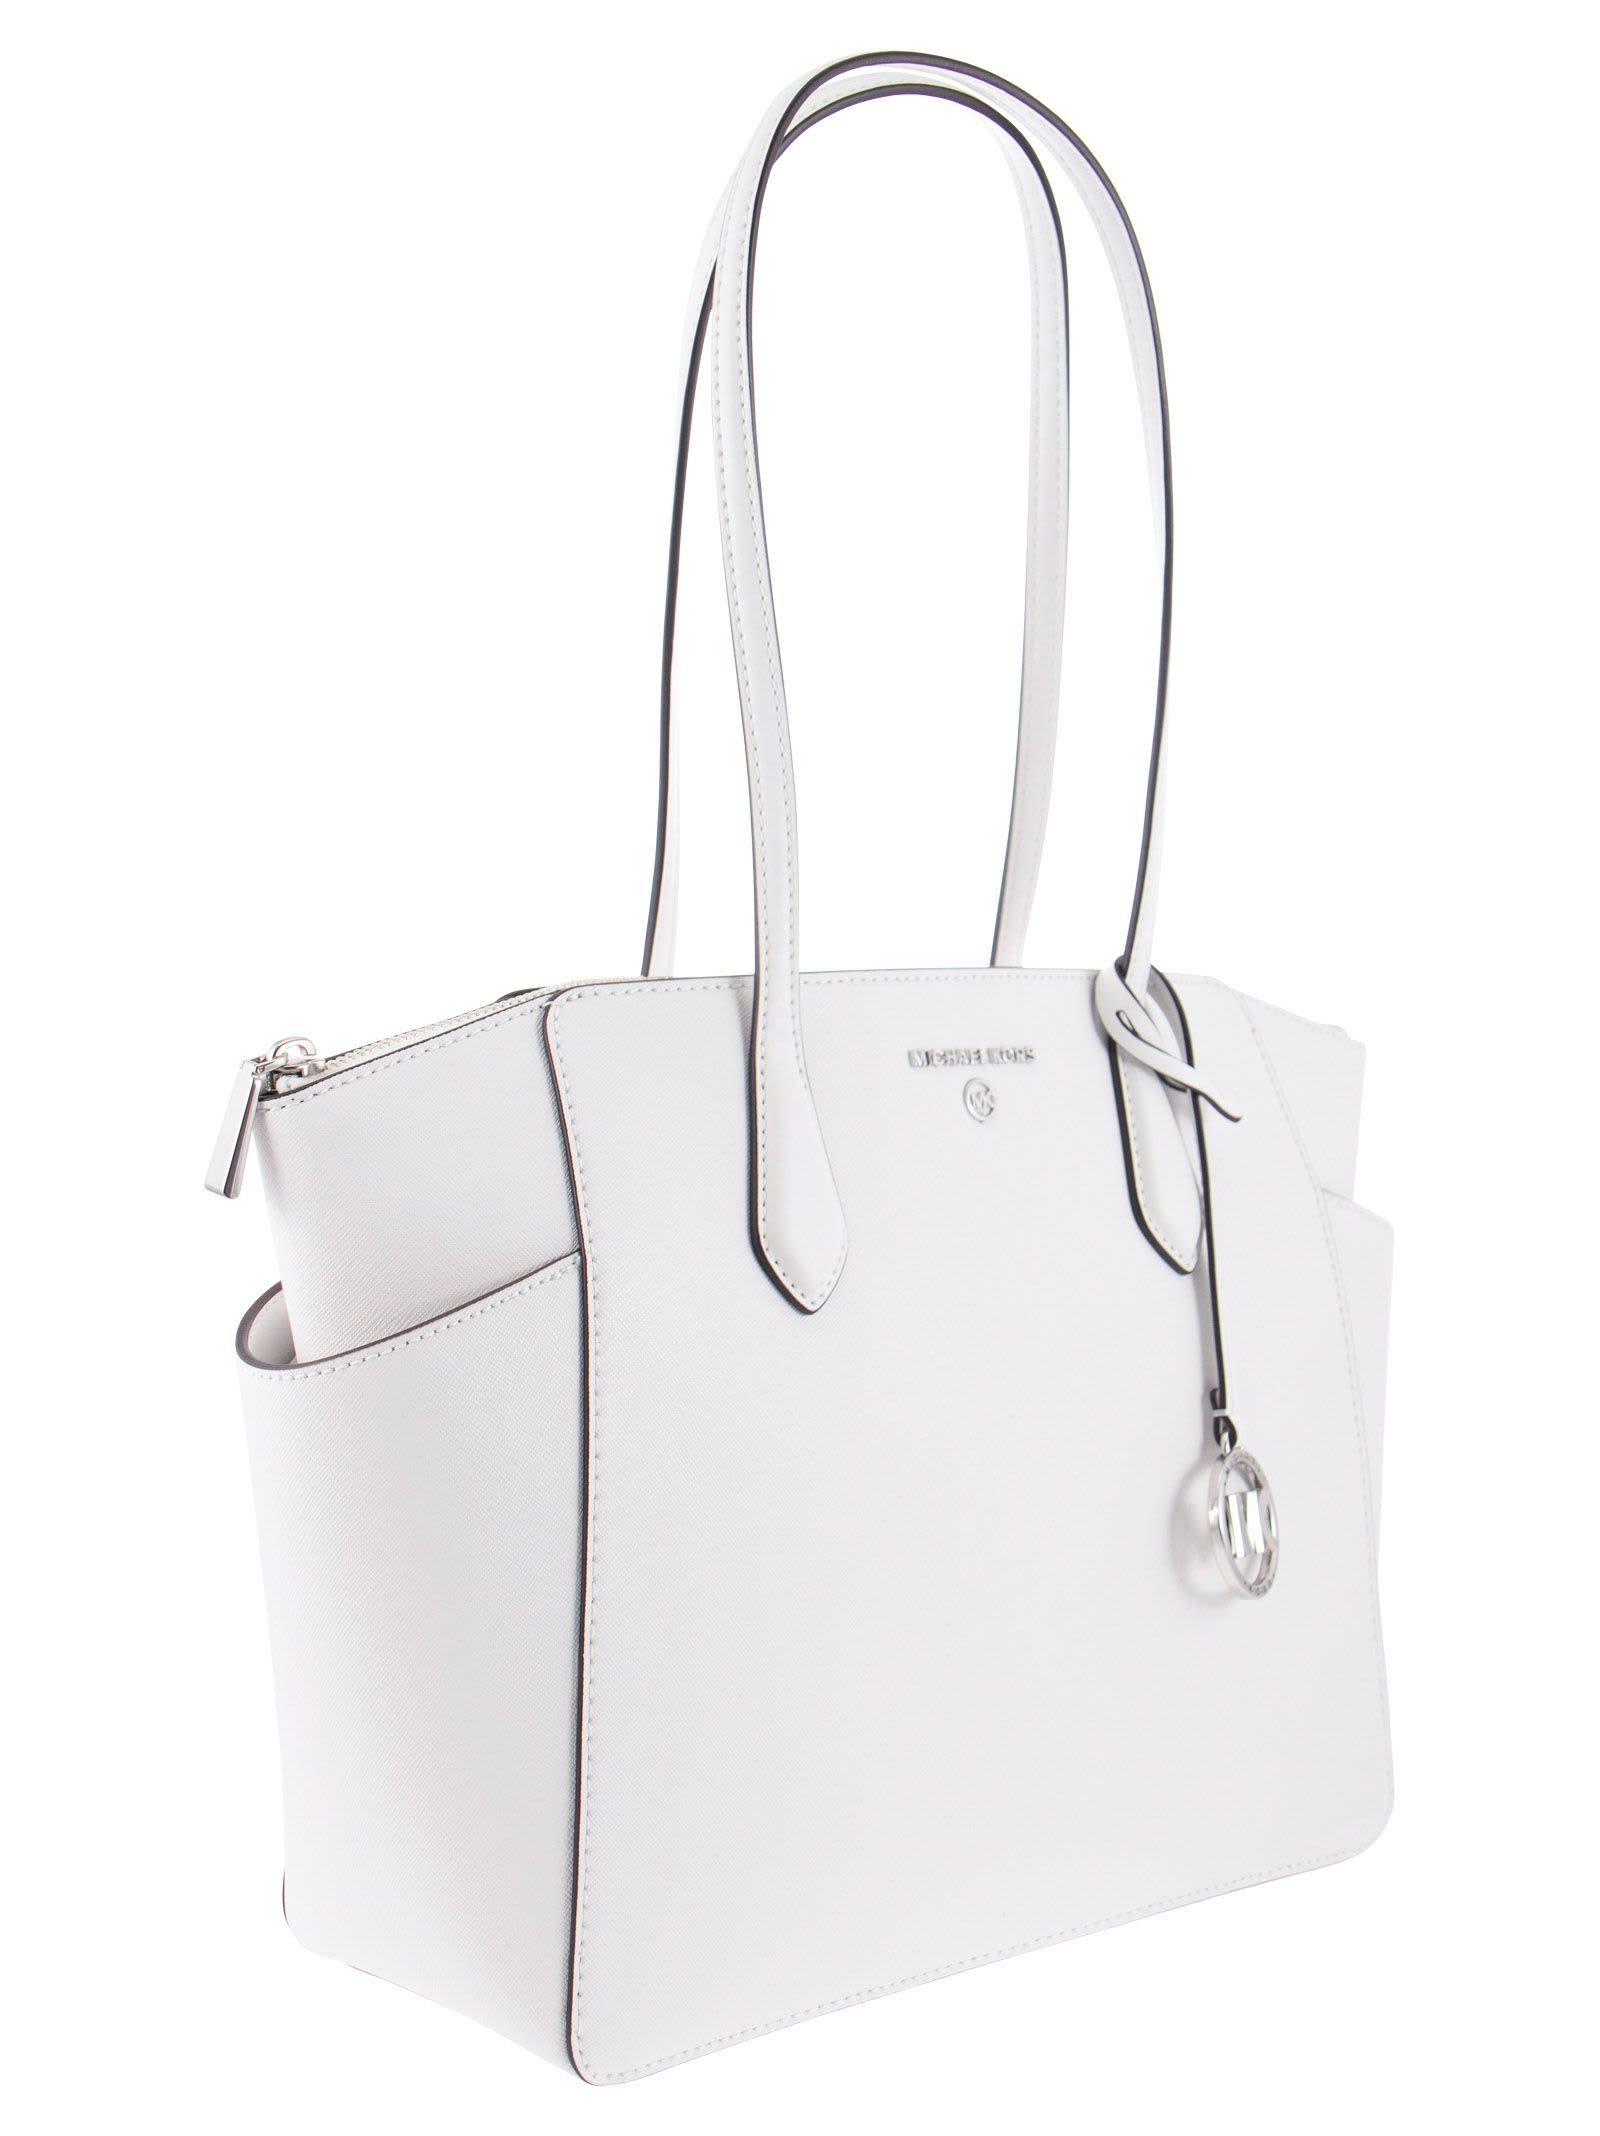 Michael Kors Charlotte Large Top-Zip Saffiano Leather Tote (Optic White), Women's